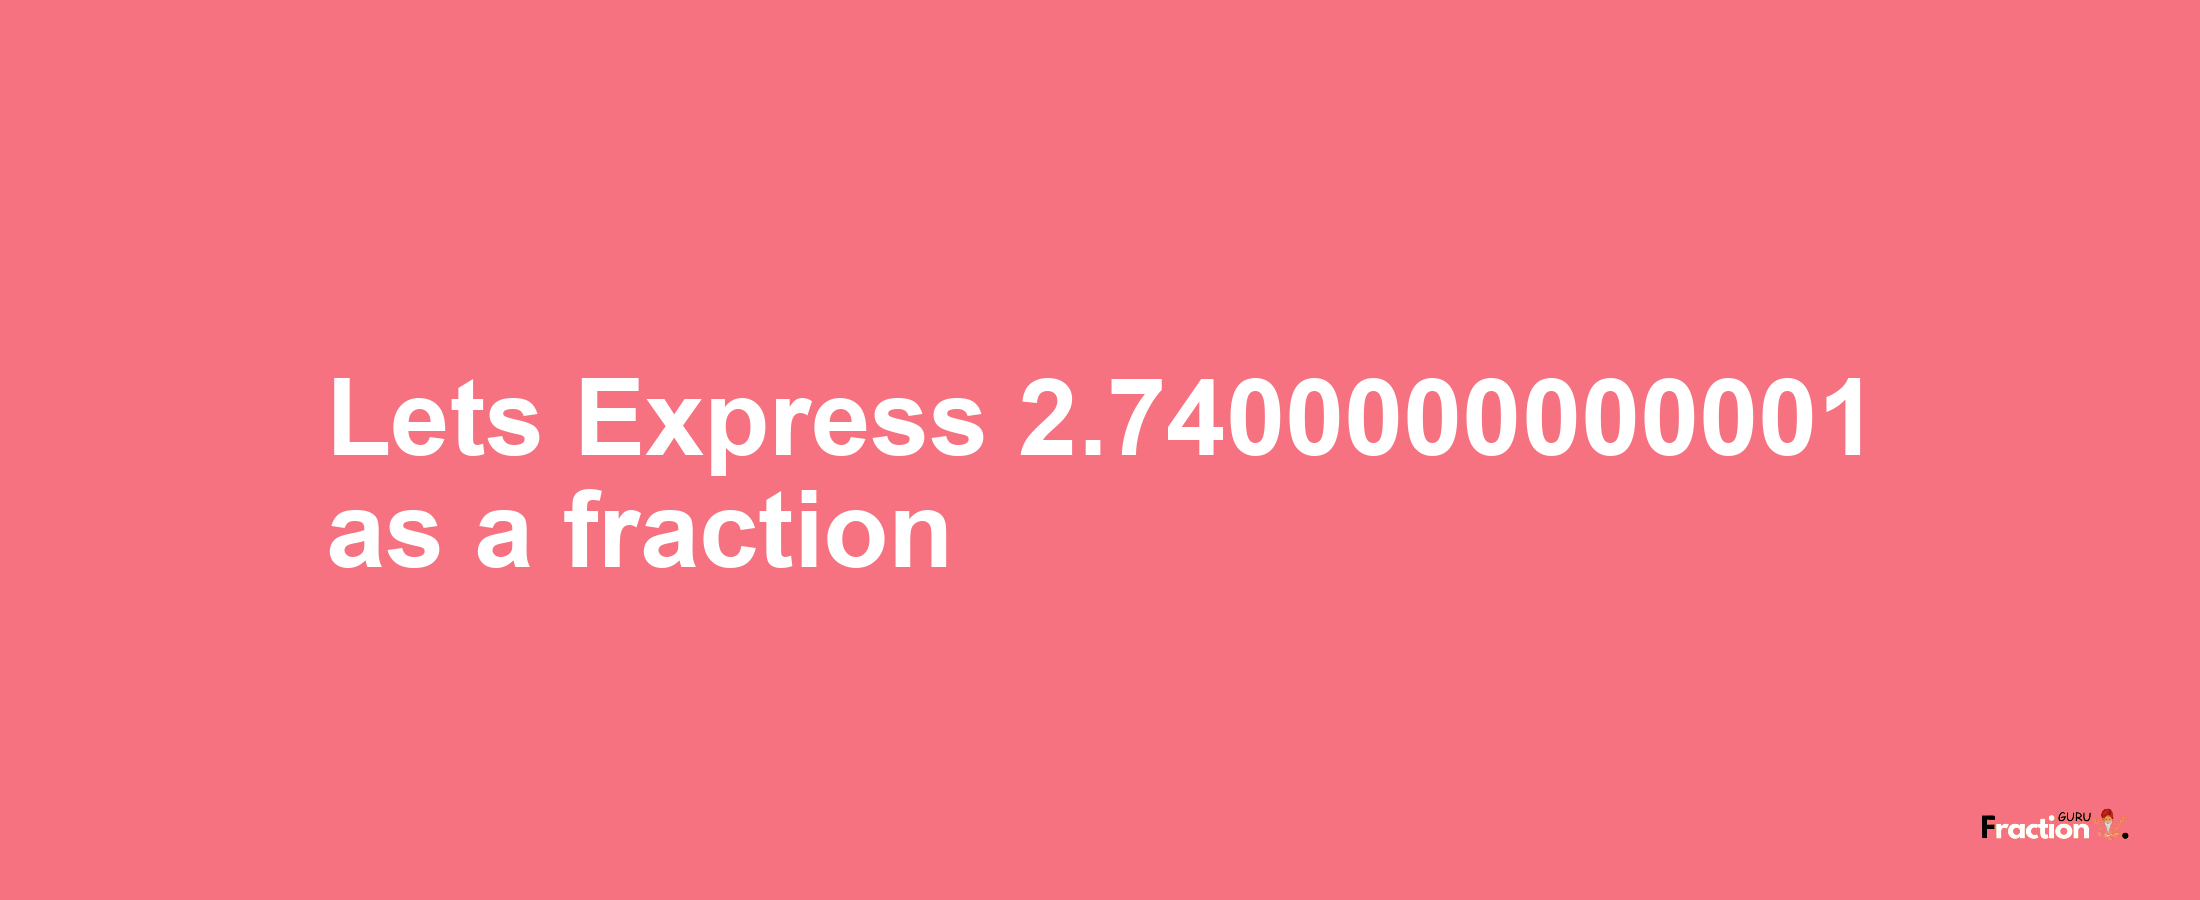 Lets Express 2.7400000000001 as afraction